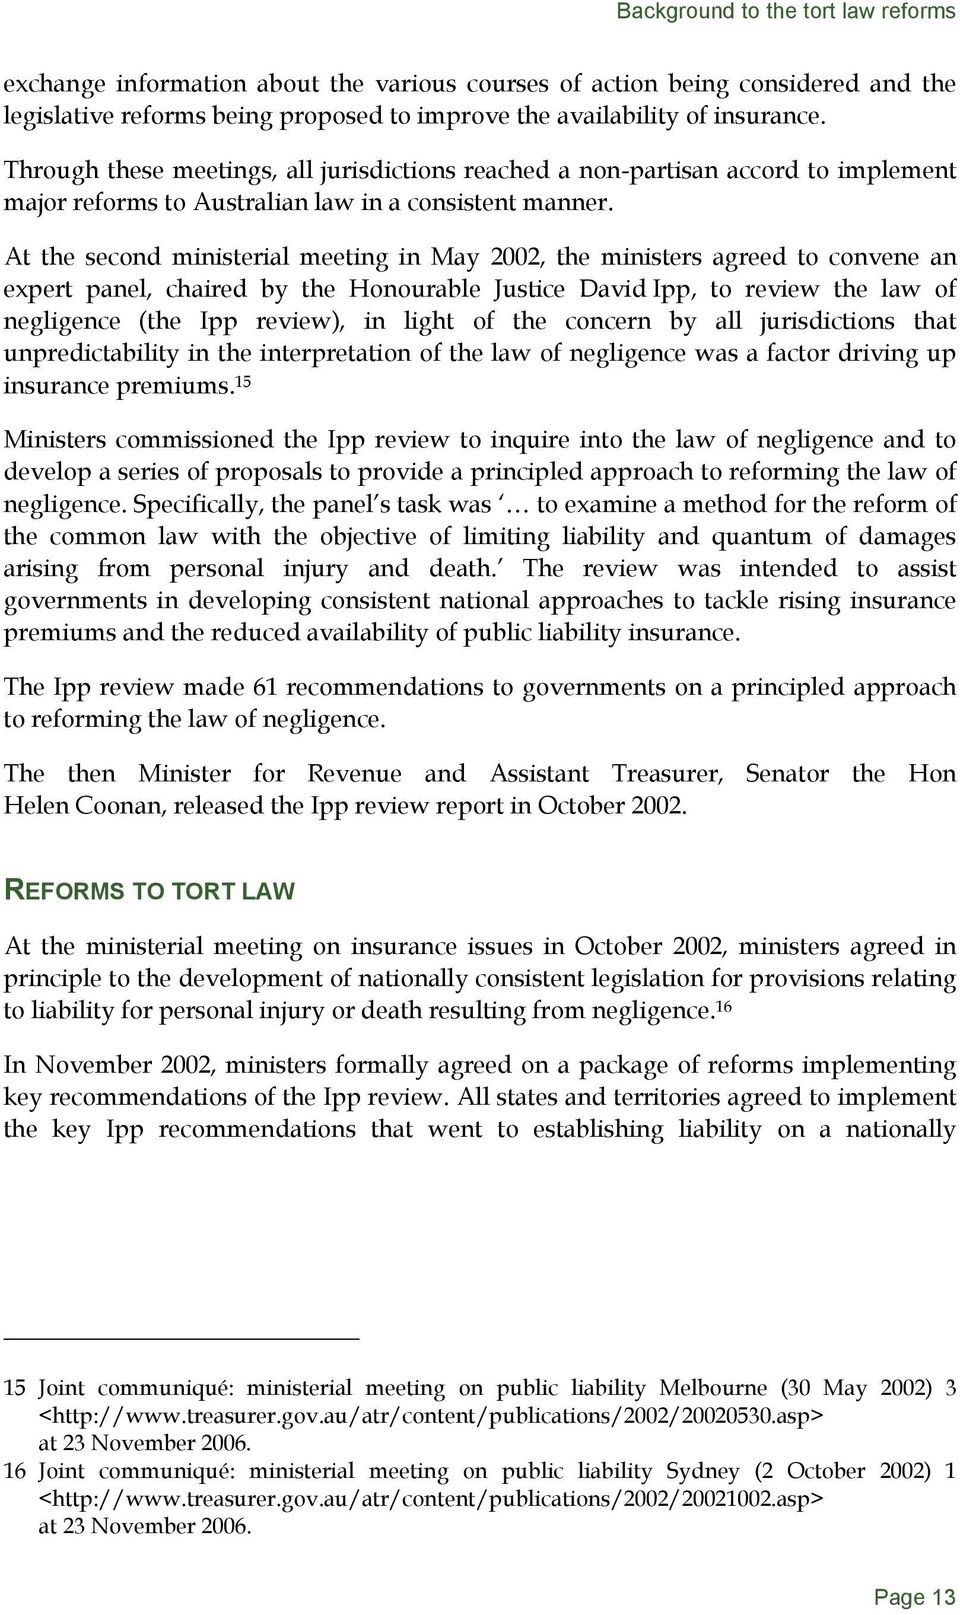 At the second ministerial meeting in May 2002, the ministers agreed to convene an expert panel, chaired by the Honourable Justice David Ipp, to review the law of negligence (the Ipp review), in light